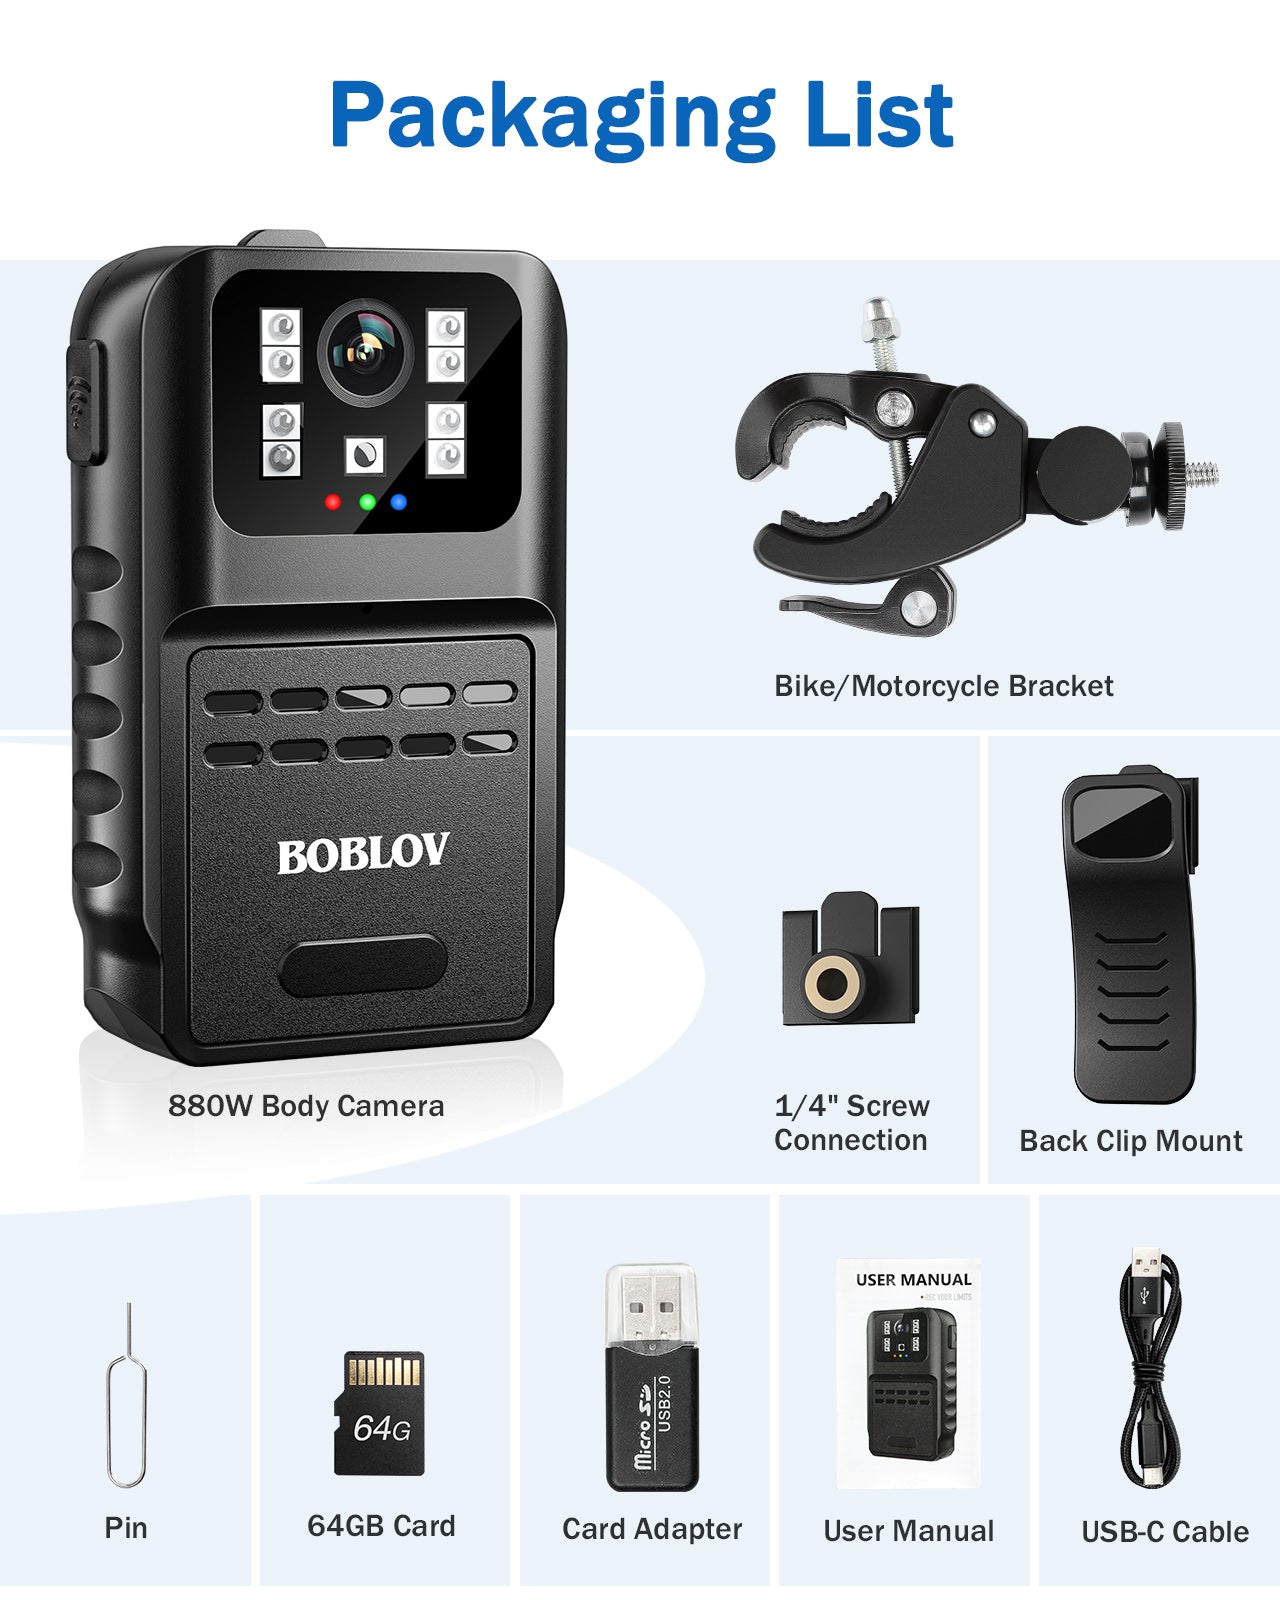 880W small body camera with 1080P resolution and night vision feature4